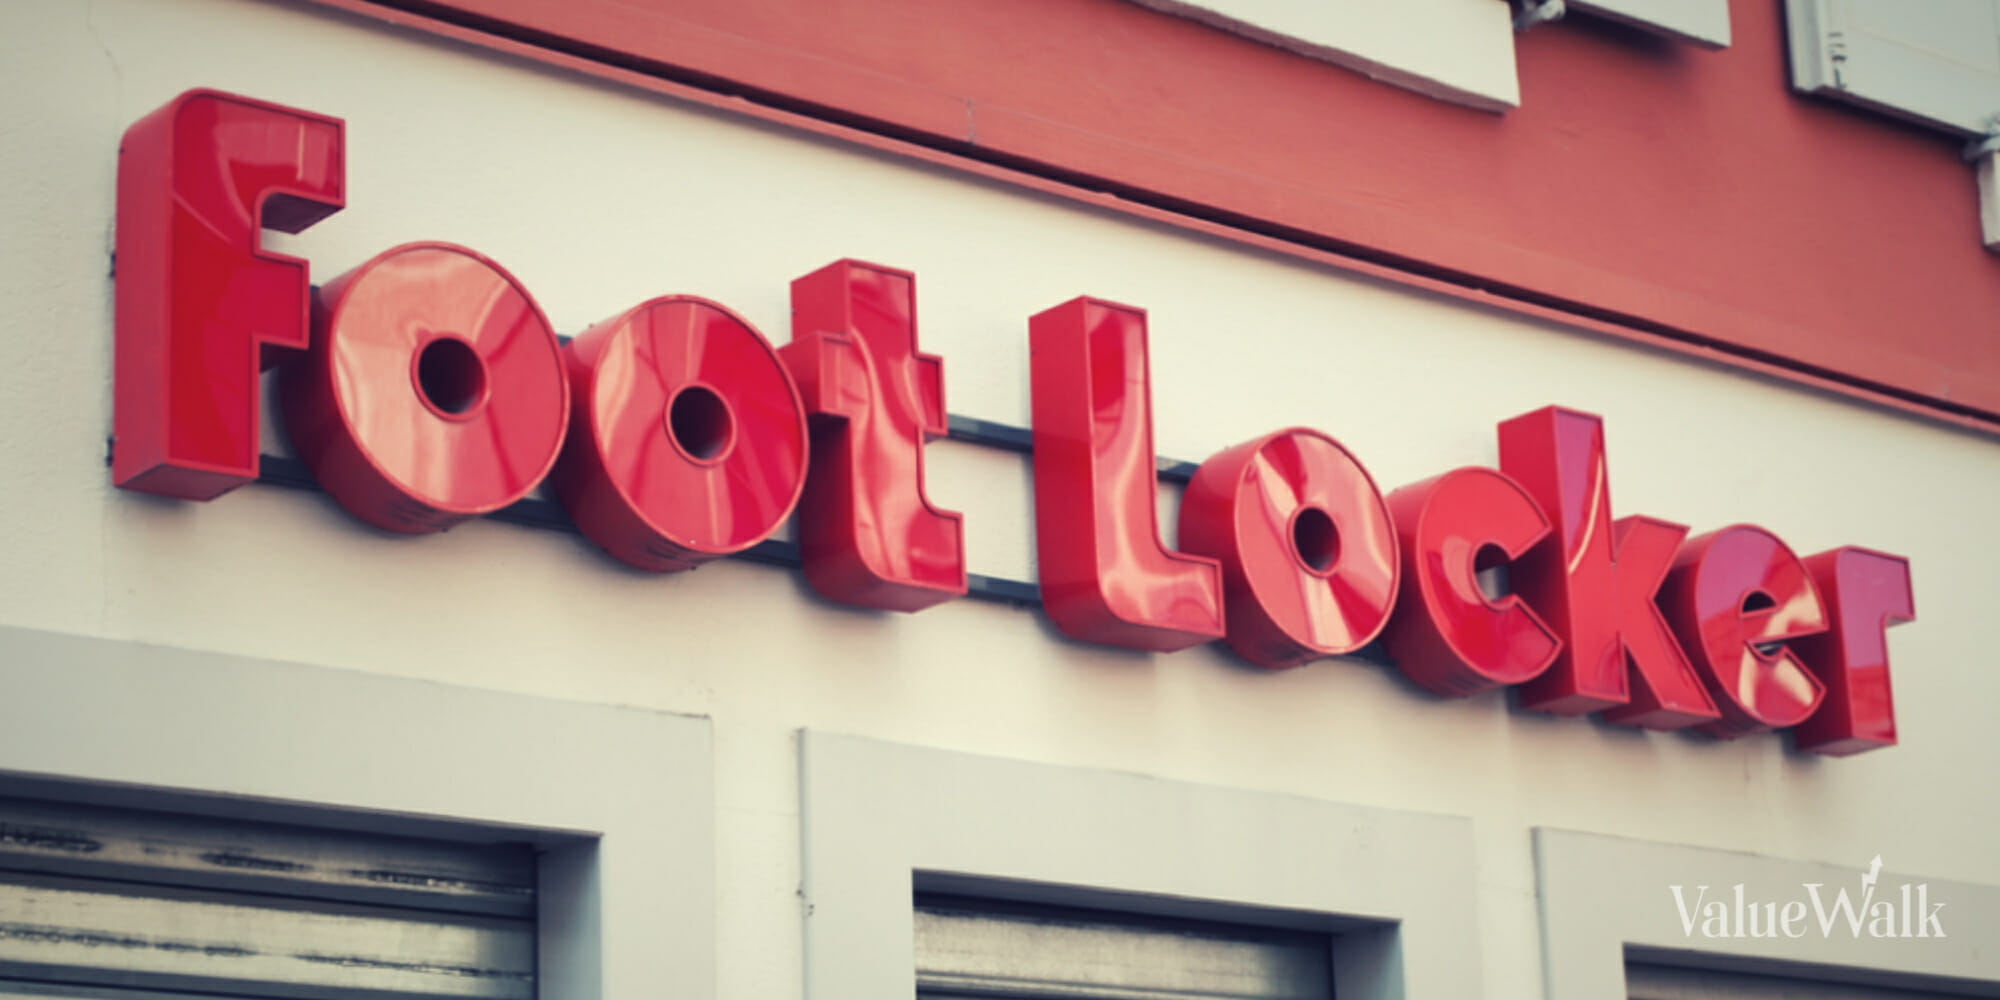 Foot Locker Stock: The Other Shoe Drops